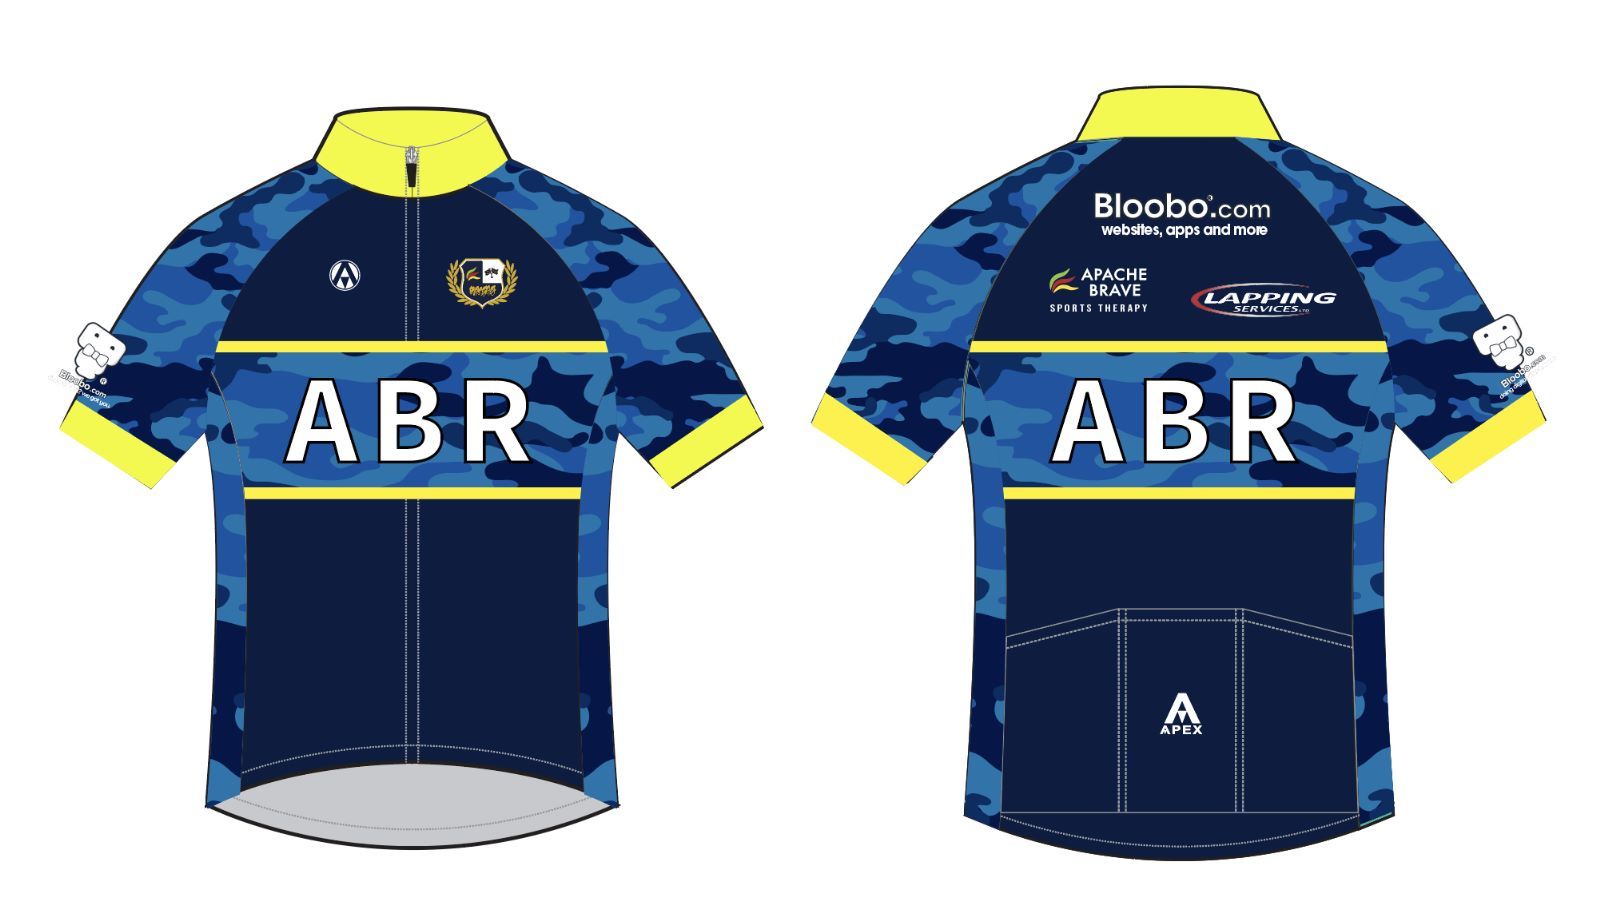 ABR cycle club jersey design